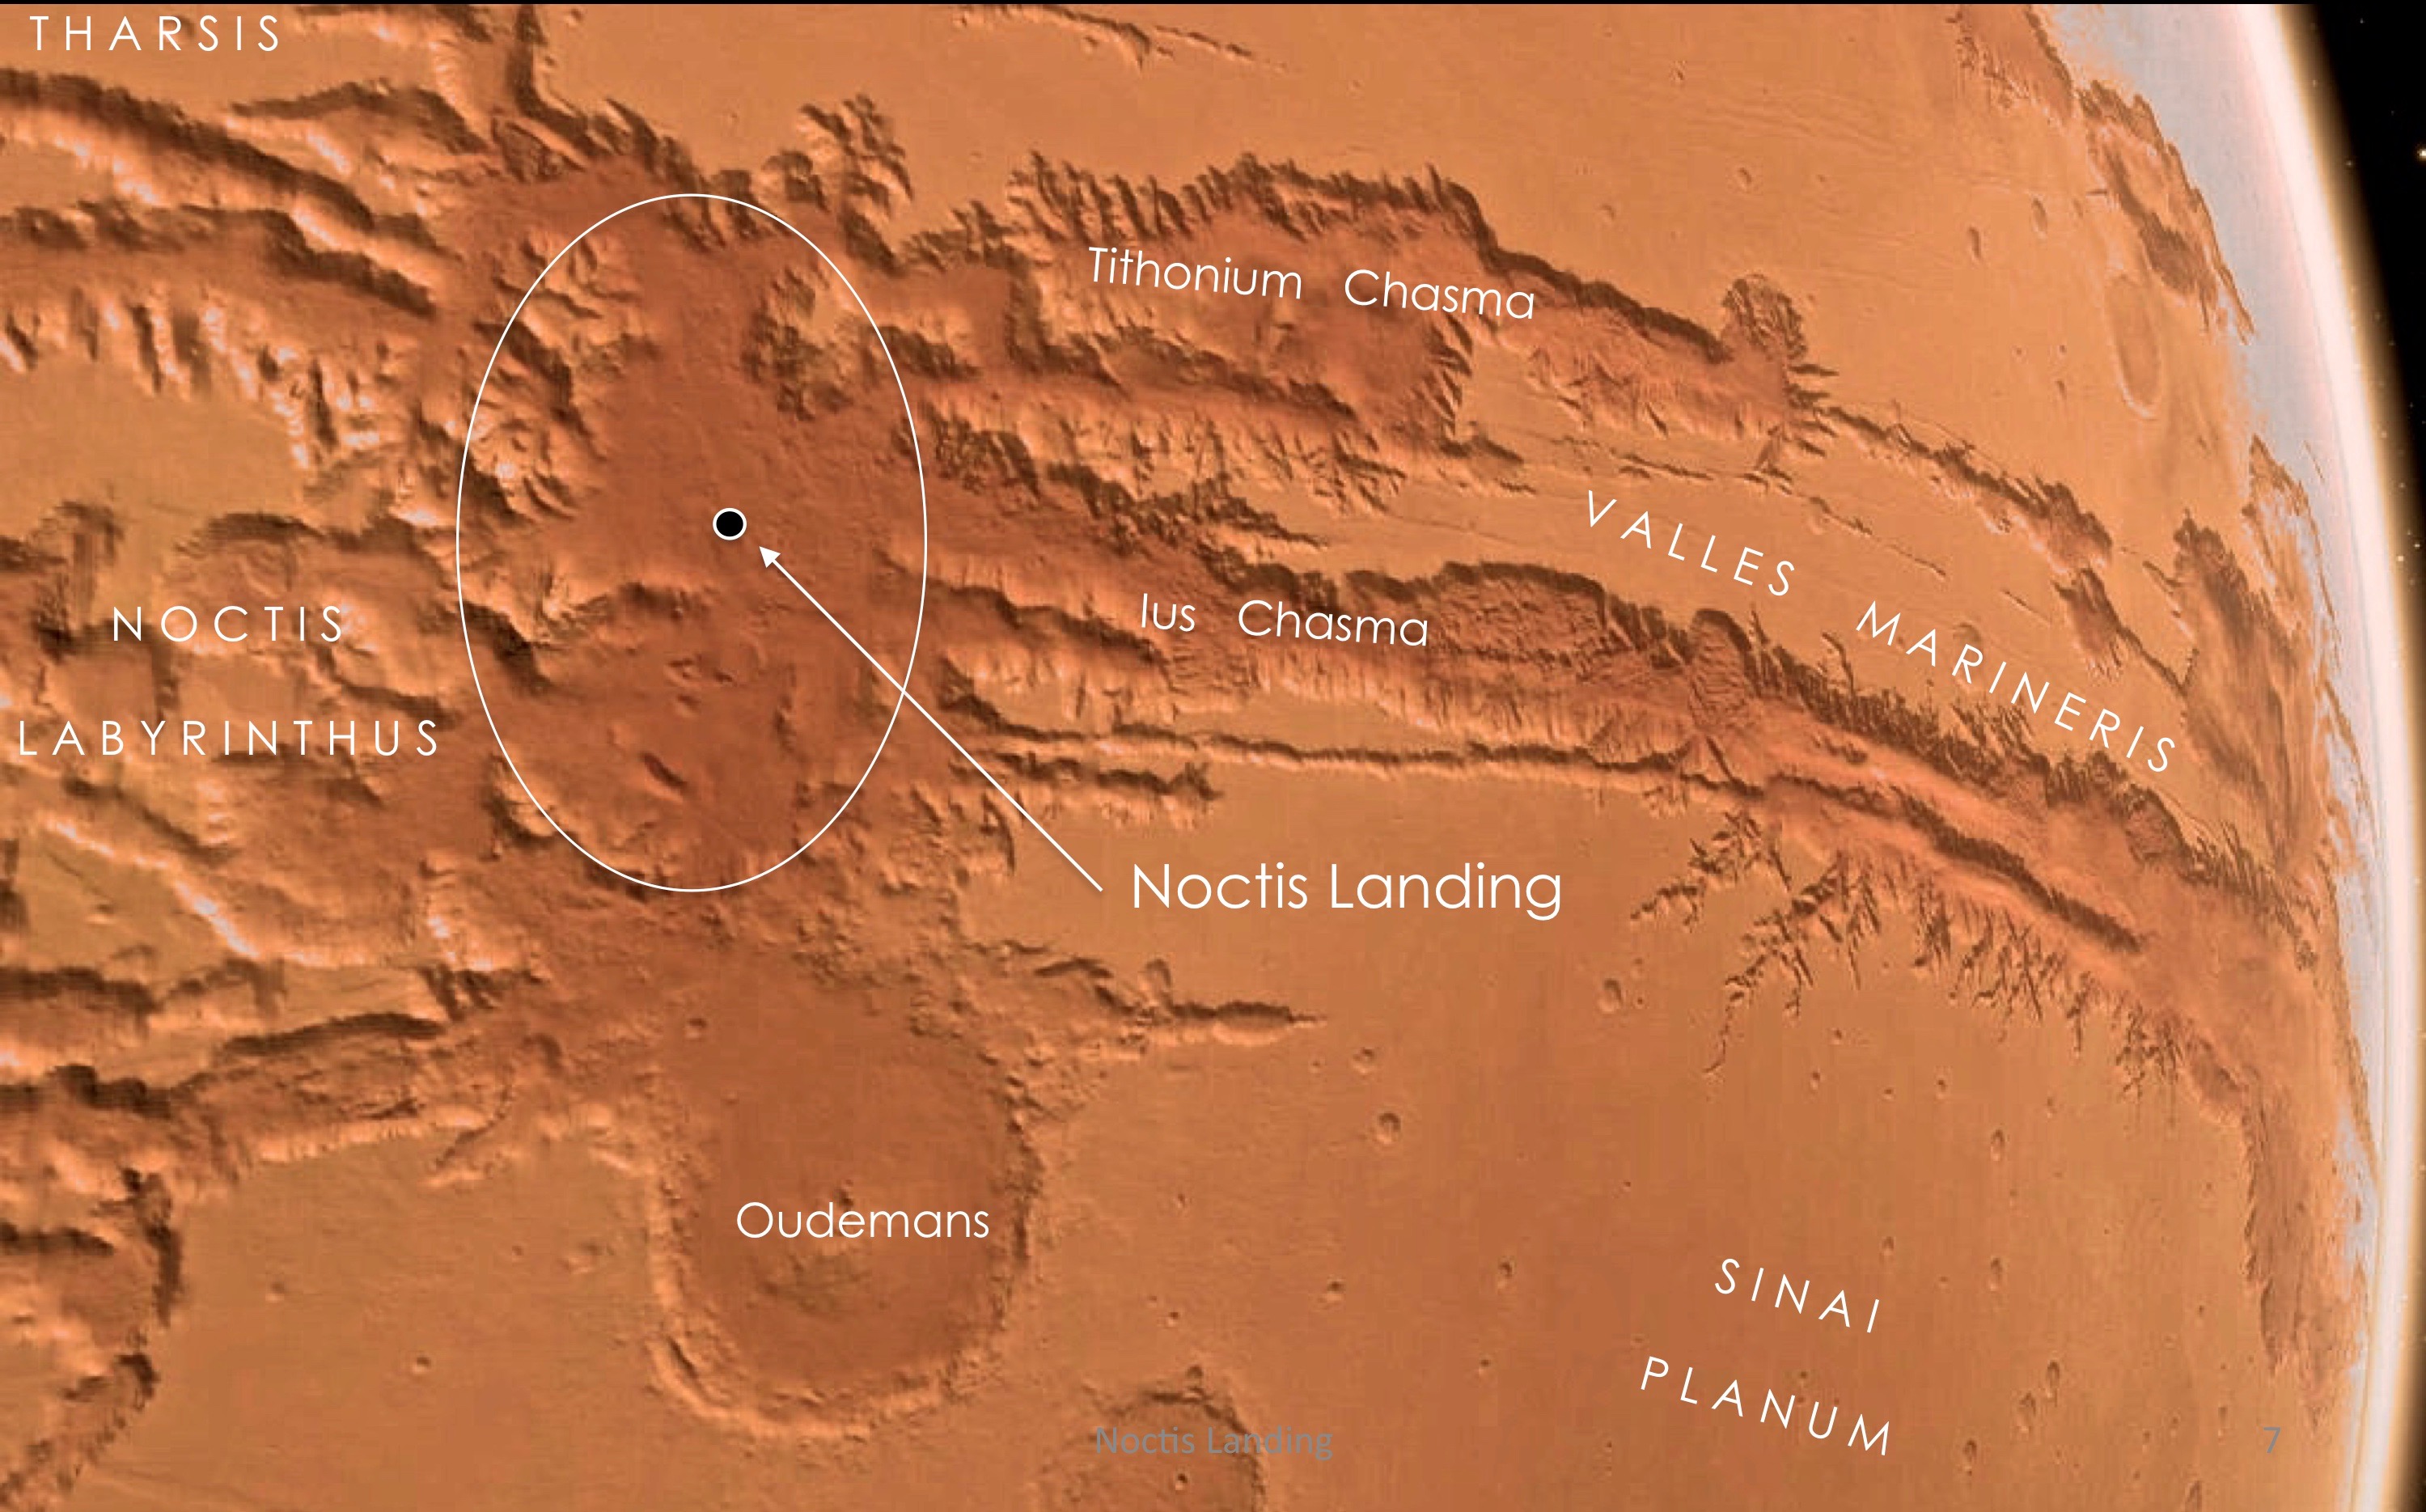 Noctis Landing on Mars is a seemingly flat transition region between Noctis Labyrinthus and the actual Valles Marineris.